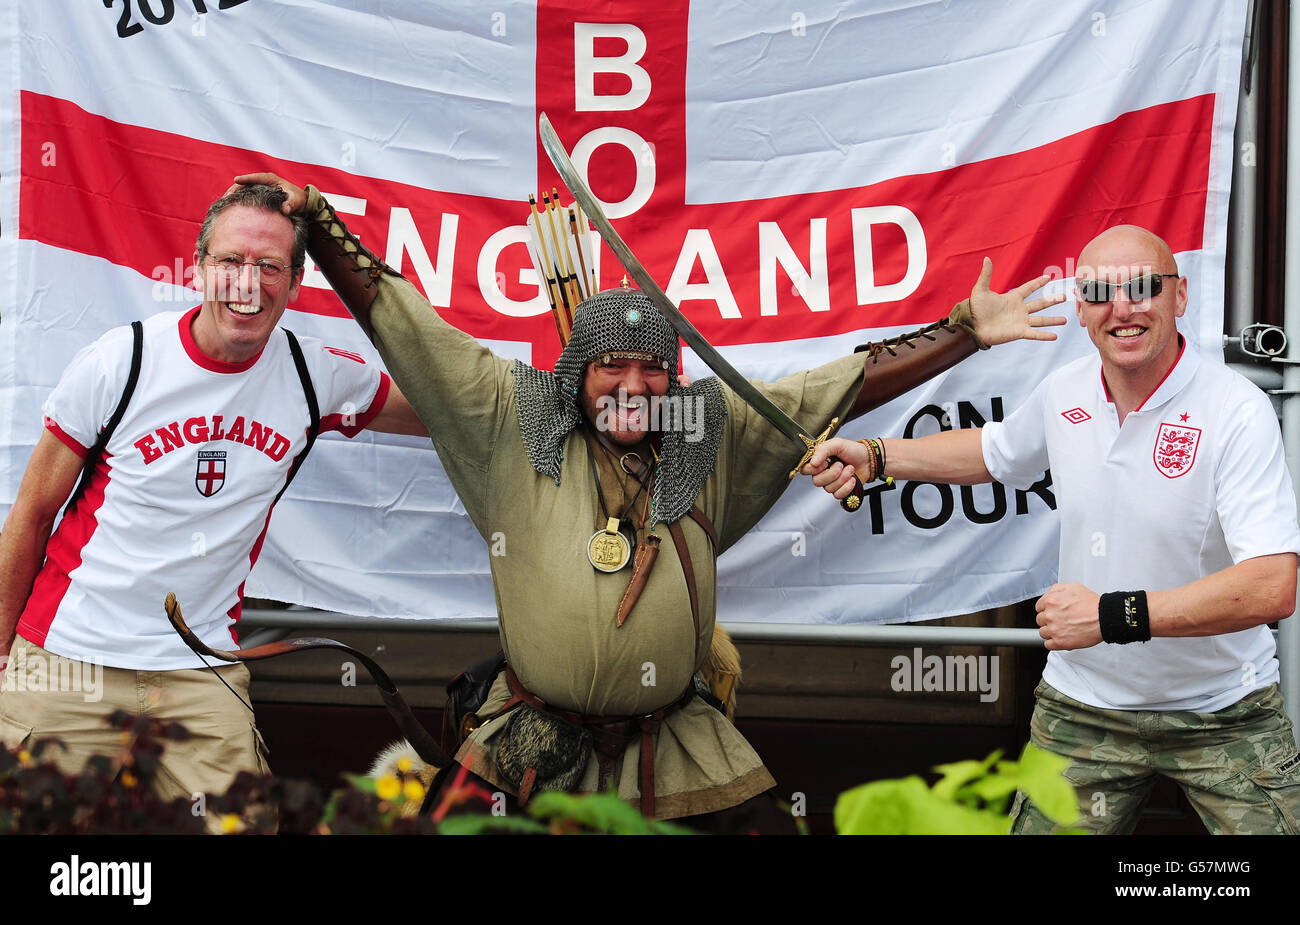 England fans Mick Breheny, 60 (left) from Boldon and Micky Smith from South Shields pose for a photo in the main square in Krakow. Stock Photo